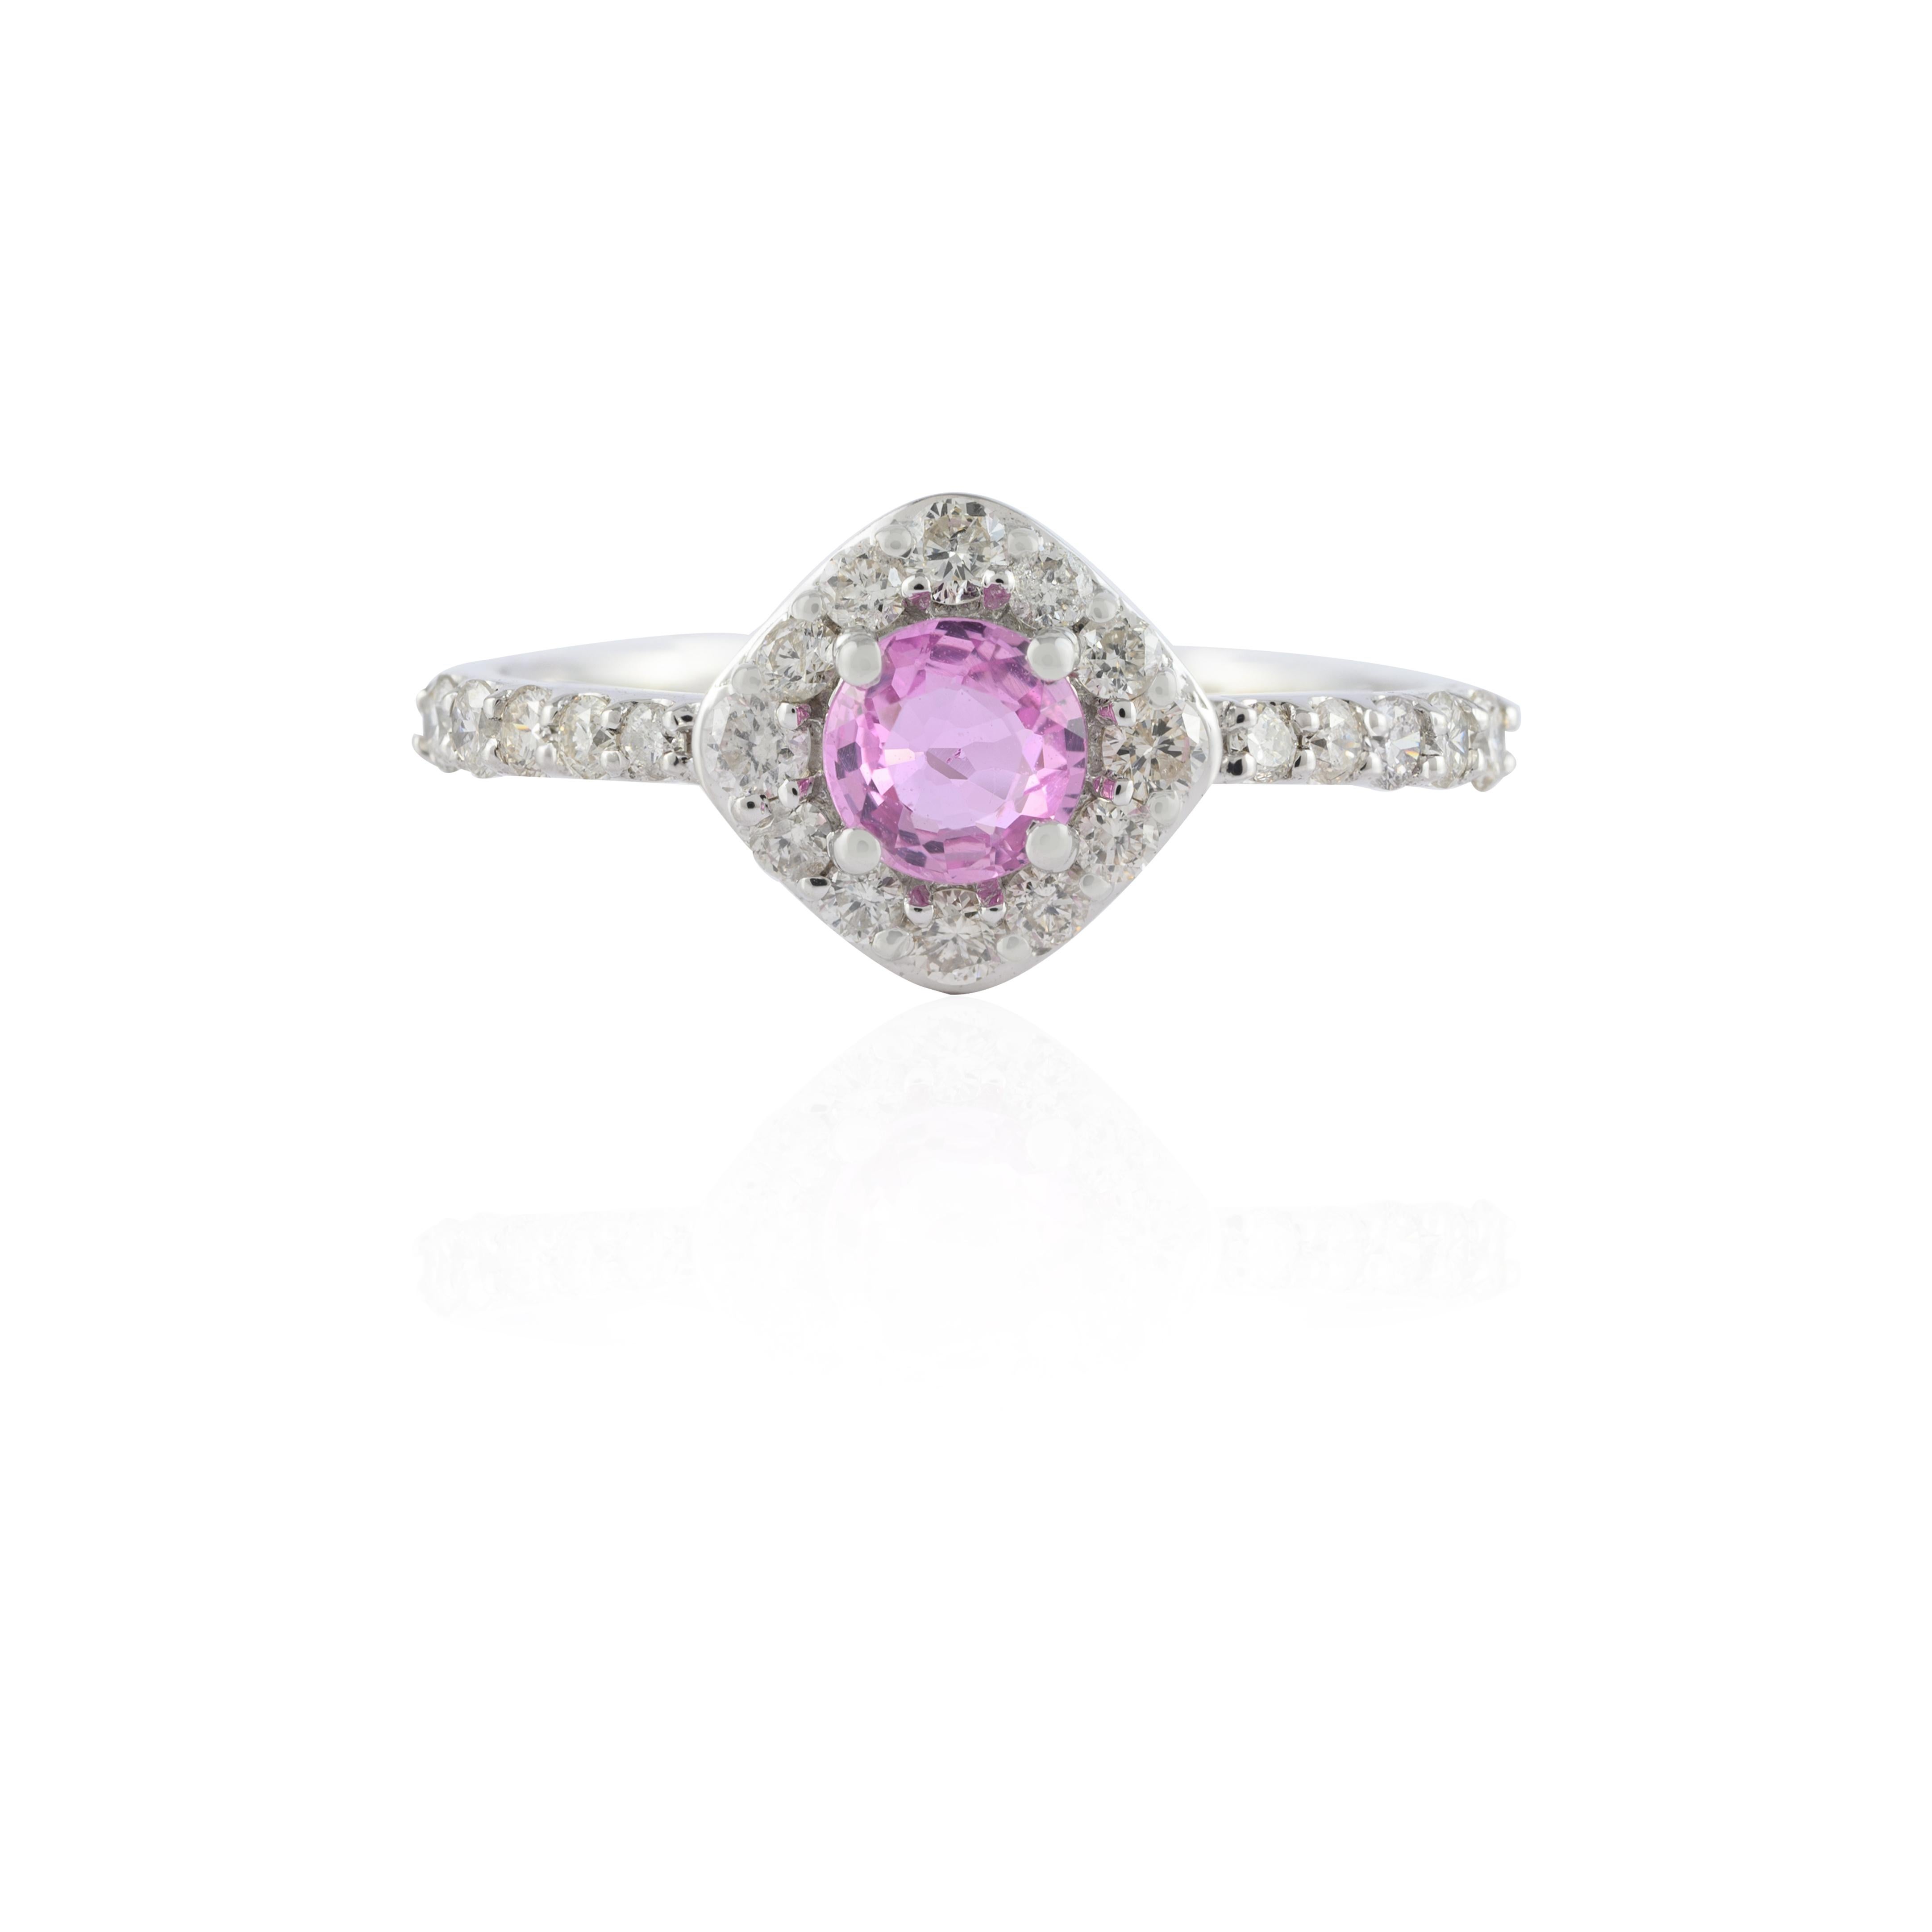 For Sale:  Minimal Halo Diamond and Pink Sapphire Ring Studded in 14k Solid White Gold 3